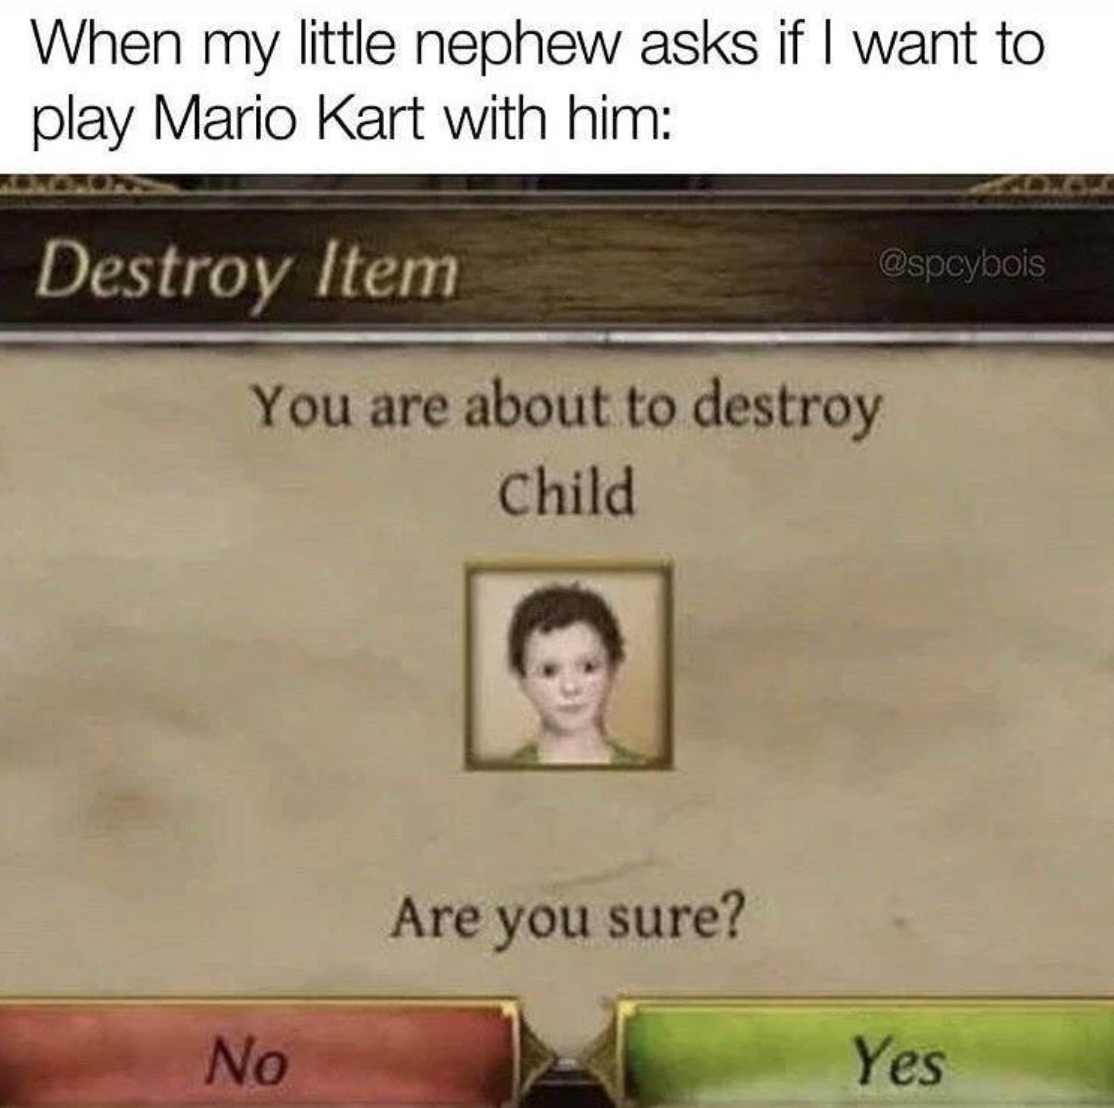 gaming memes - you about to destroy object child meme - When my little nephew asks if I want to play Mario Kart with him Destroy Item You are about to destroy Child Are you sure? No Yes